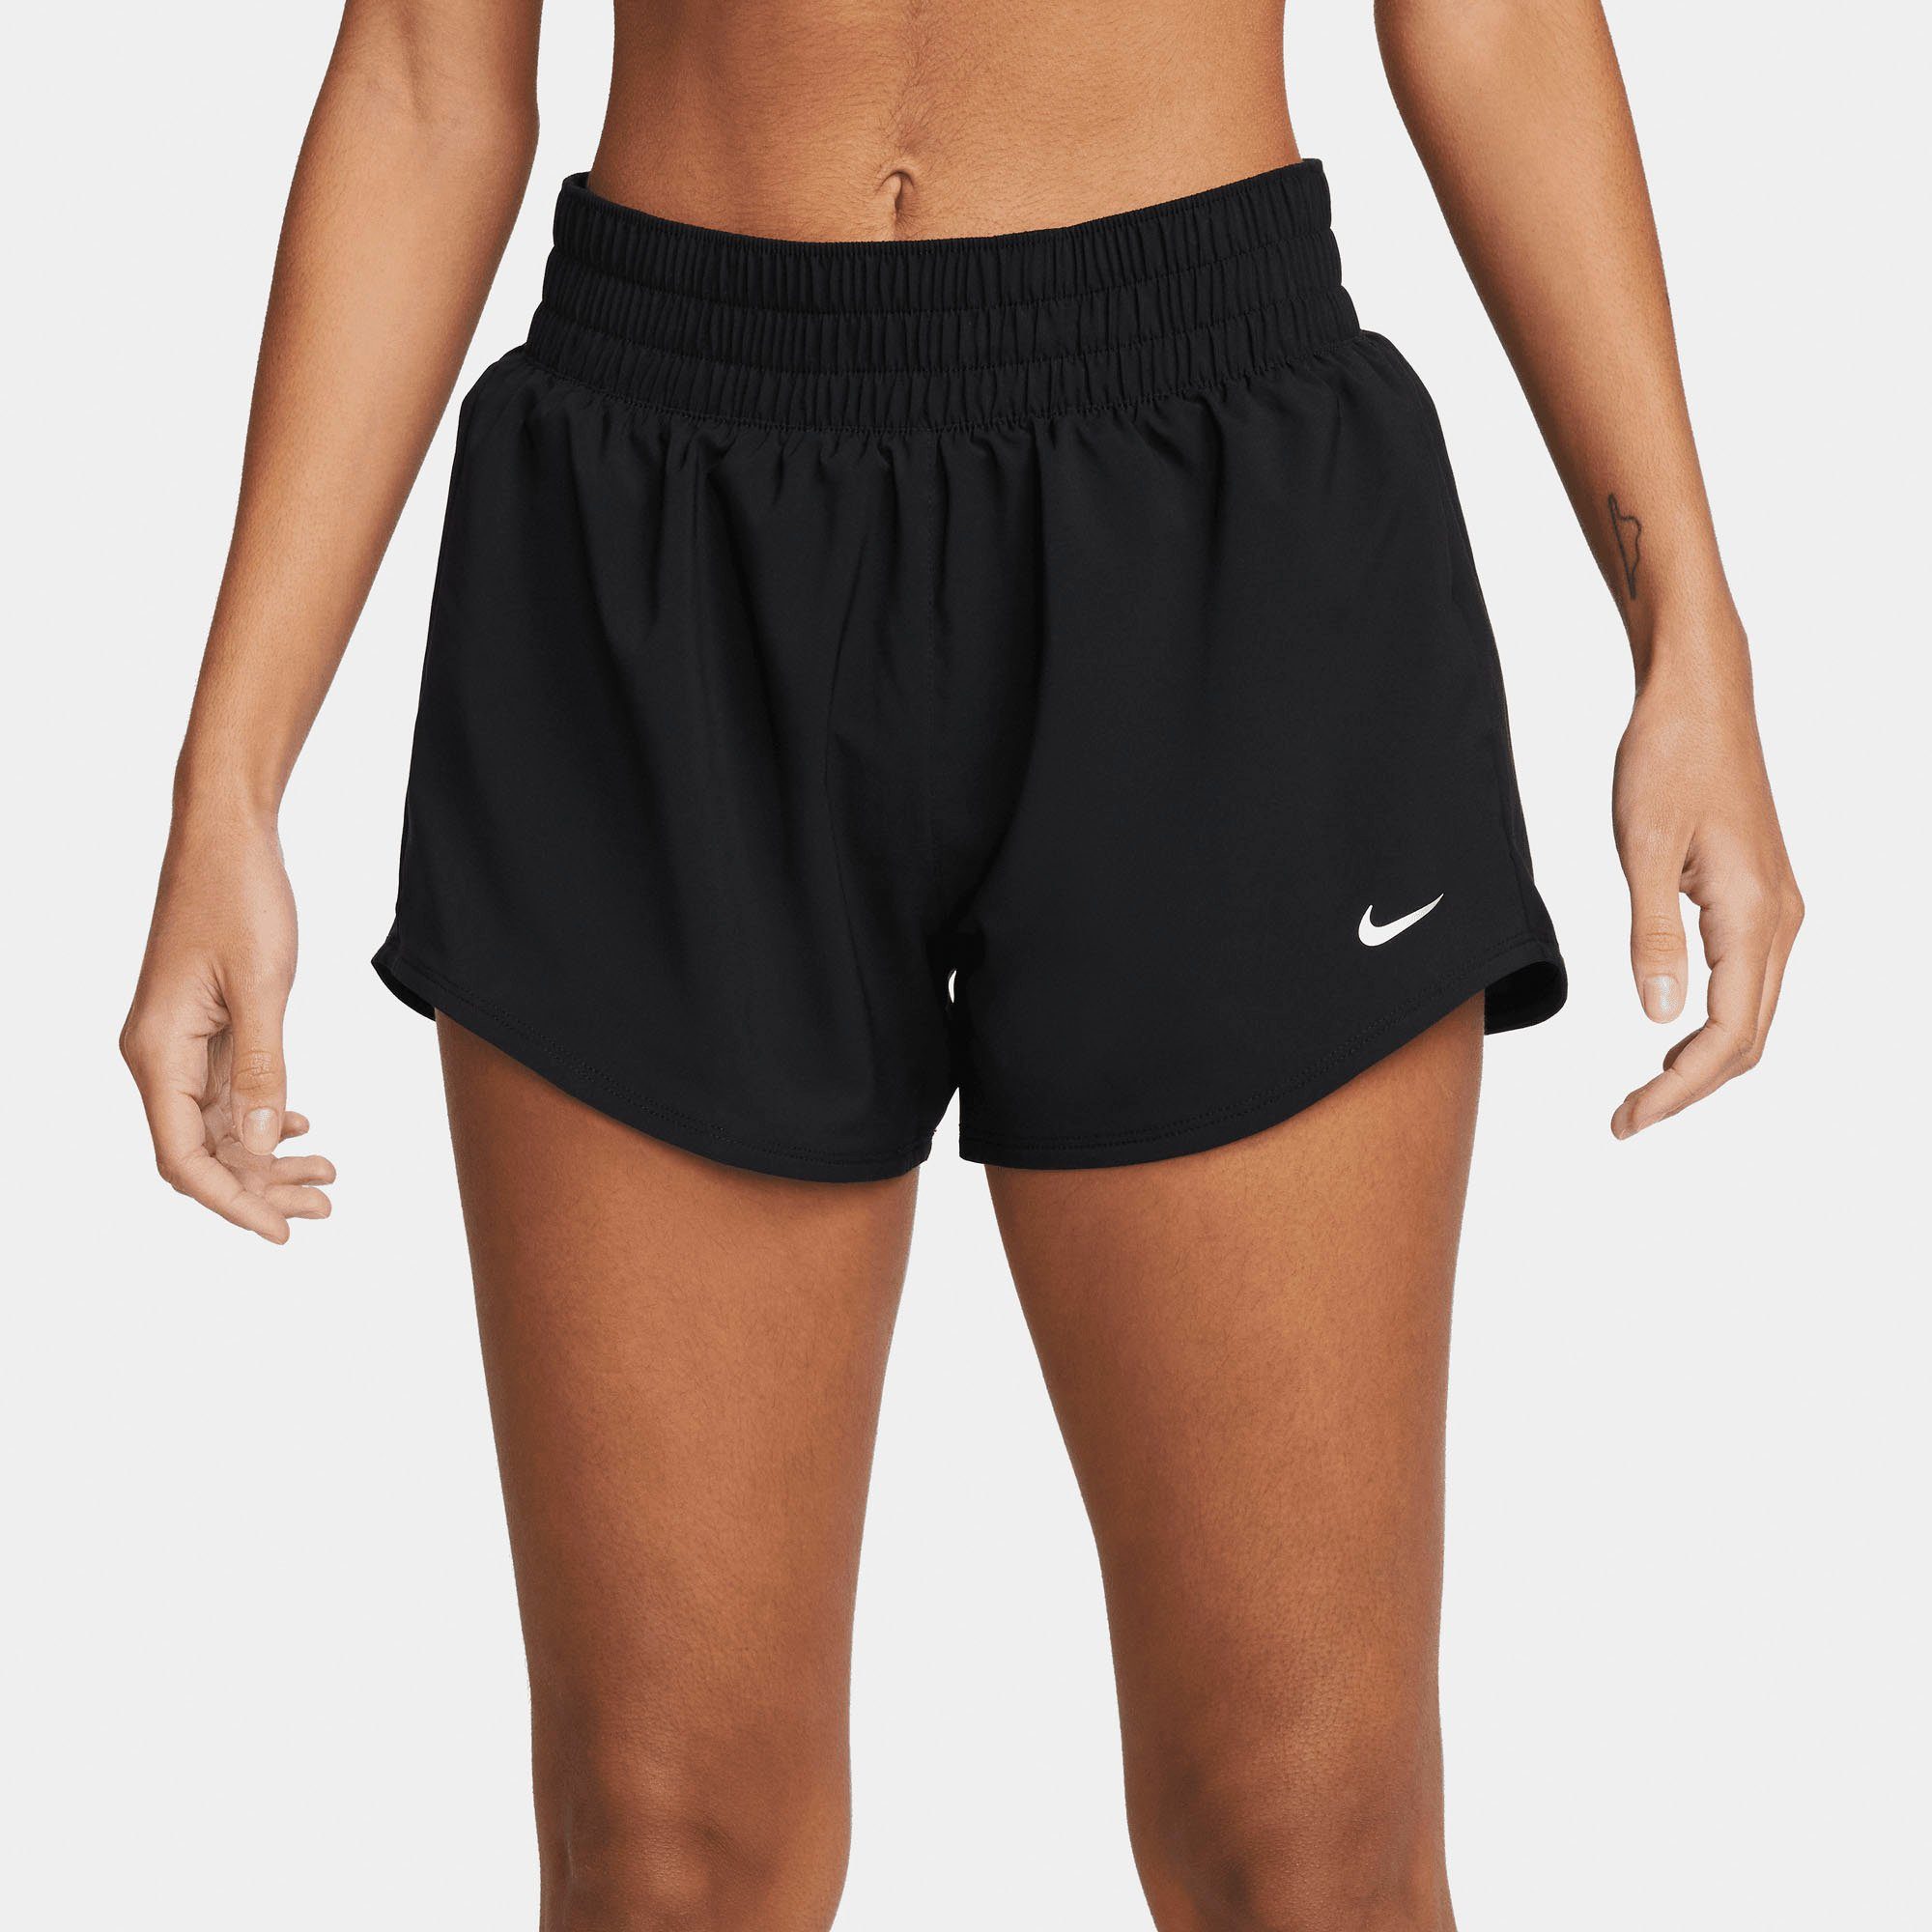 Nike Trainingsshorts WOMEN'S BRIEF-LINED BLACK/REFLECTIVE SILV MID-RISE SHORTS ONE DRI-FIT